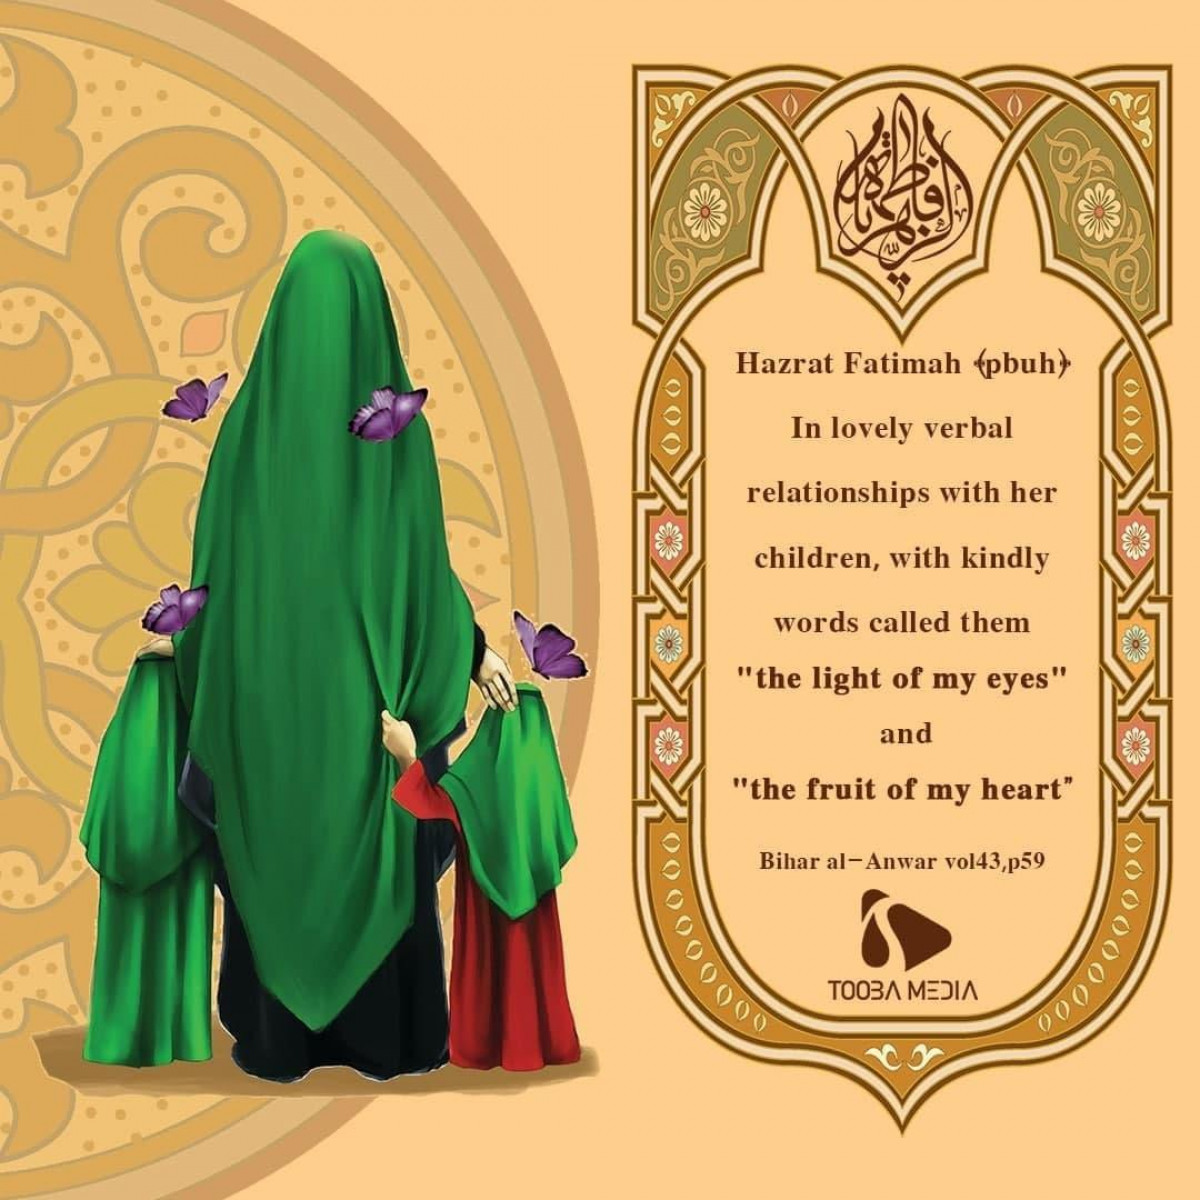 Hazrat Fatimah (pbuh) In lovely verbal relationships with her children